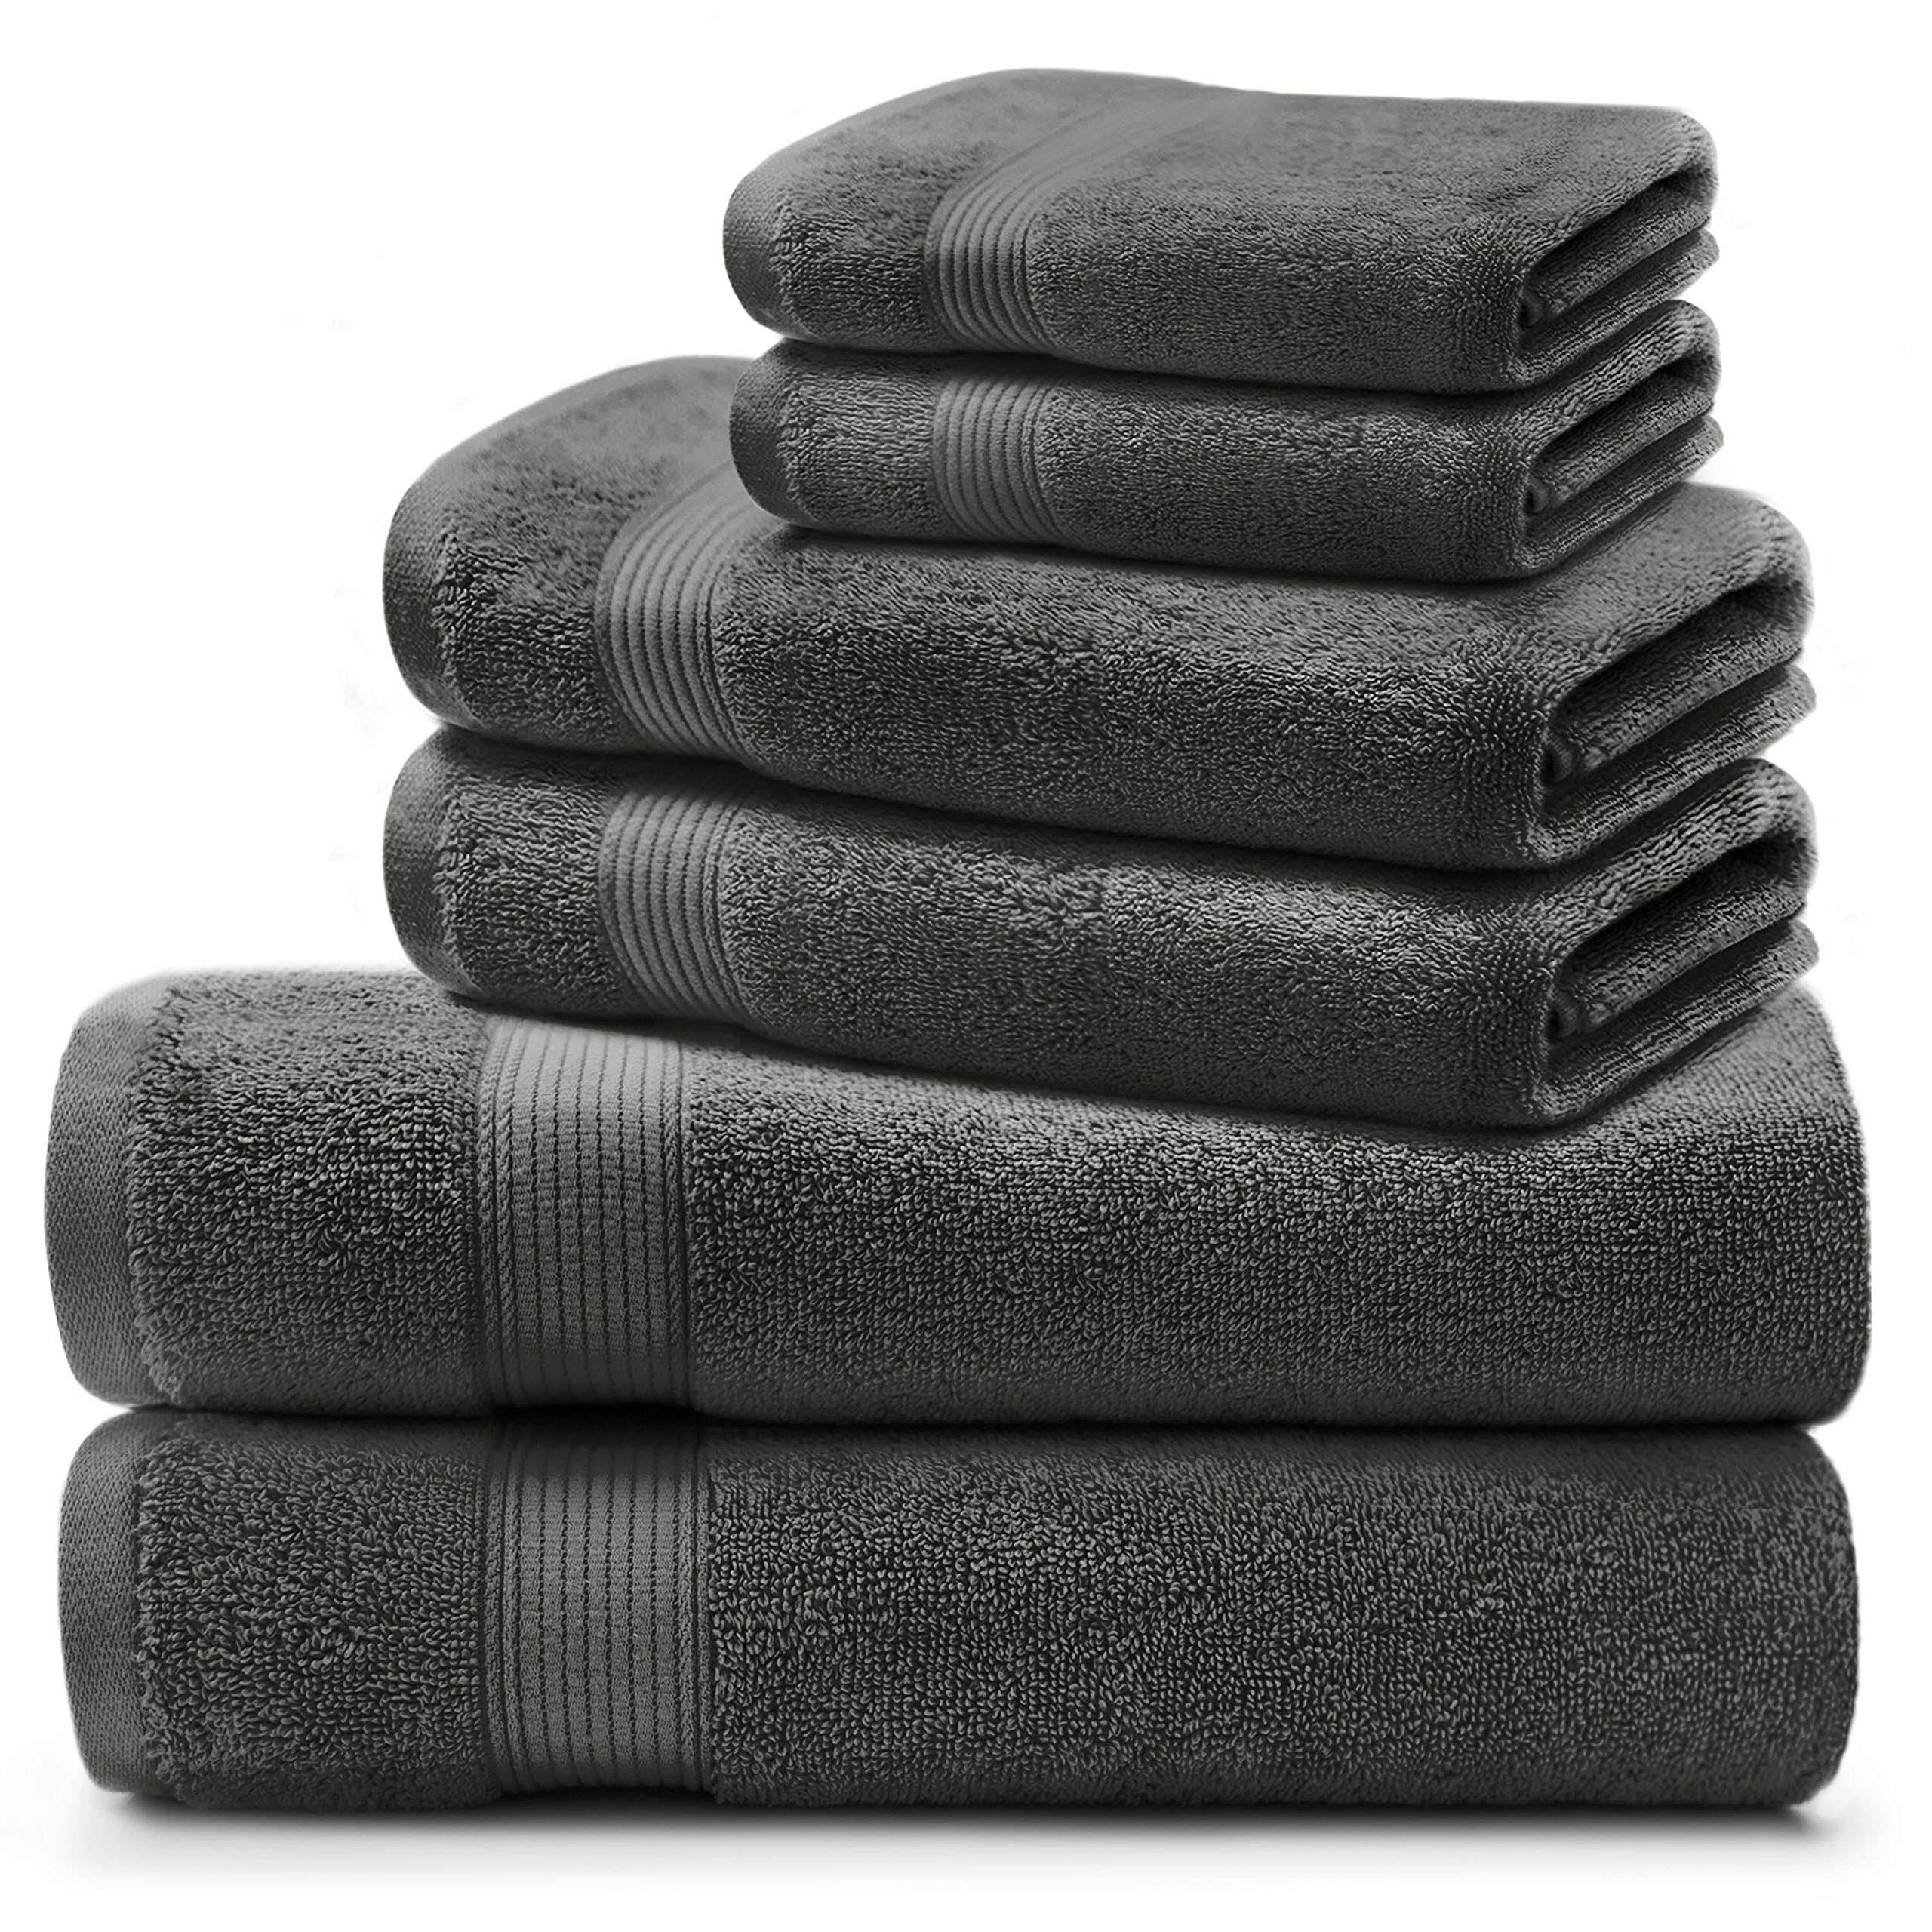 Microdry 100% Cotton Luxurious 6 Piece Towel Set with Enhanced Airsoft ...